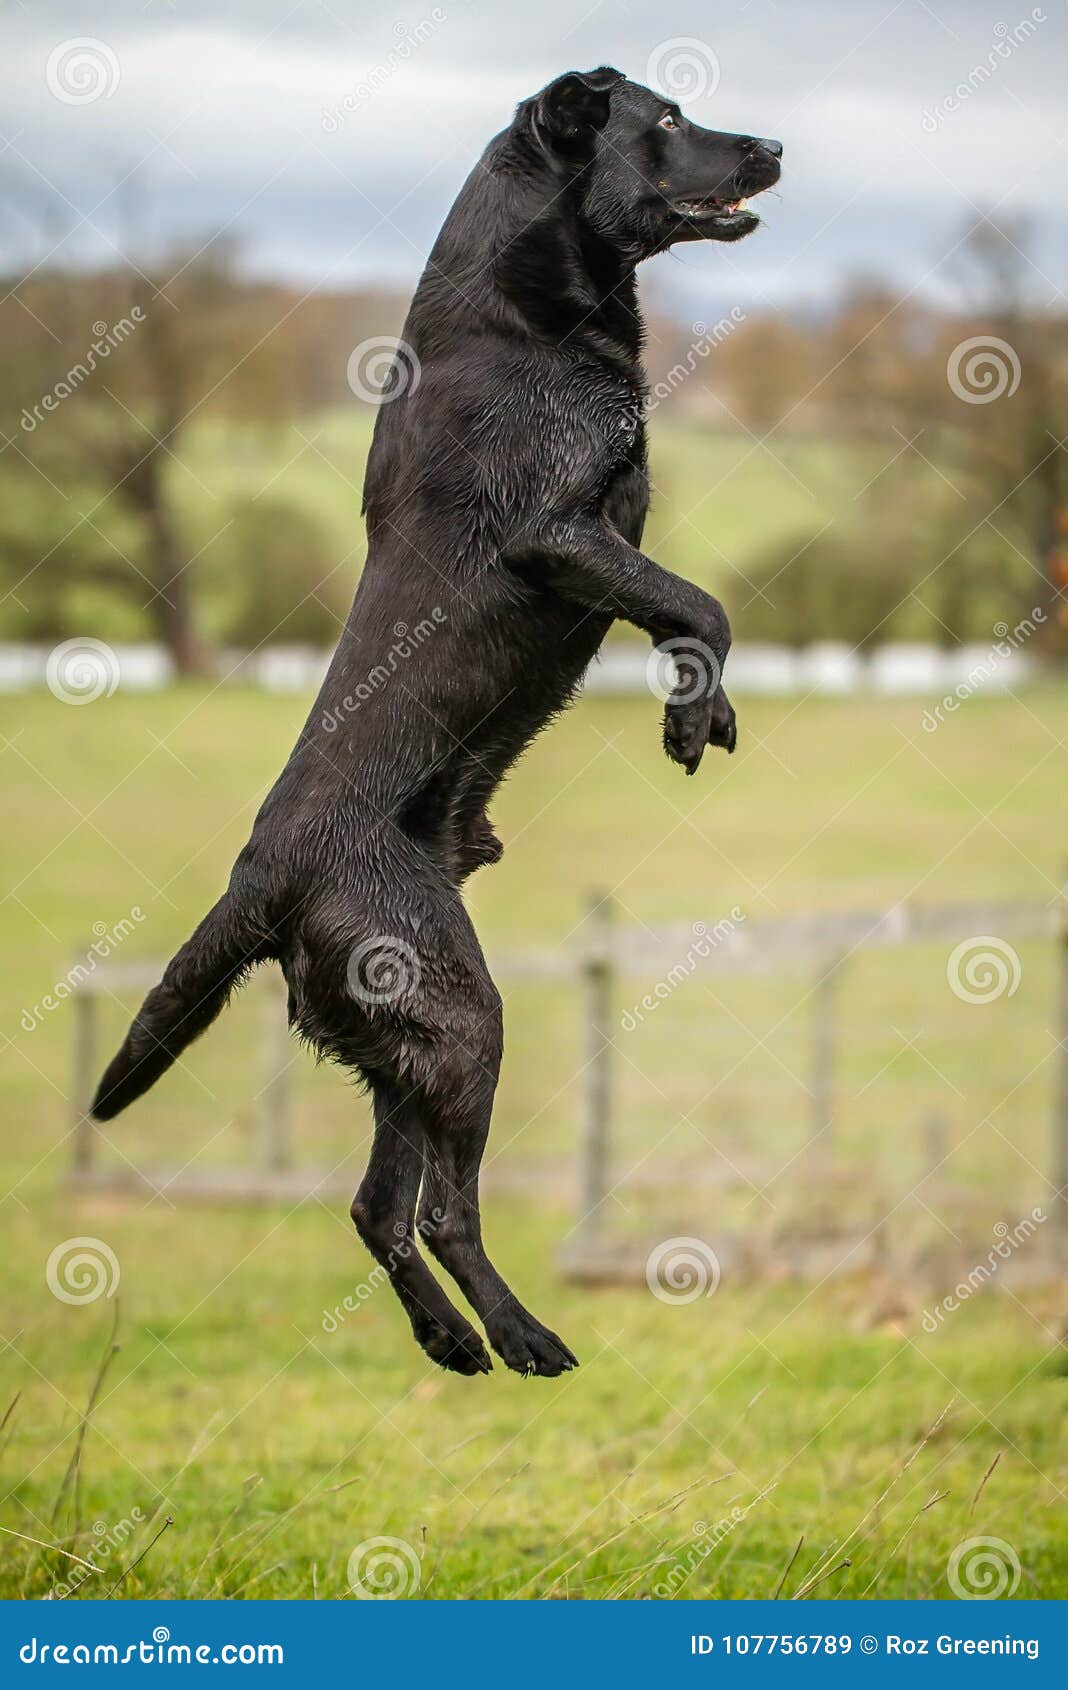 are labradors athletic